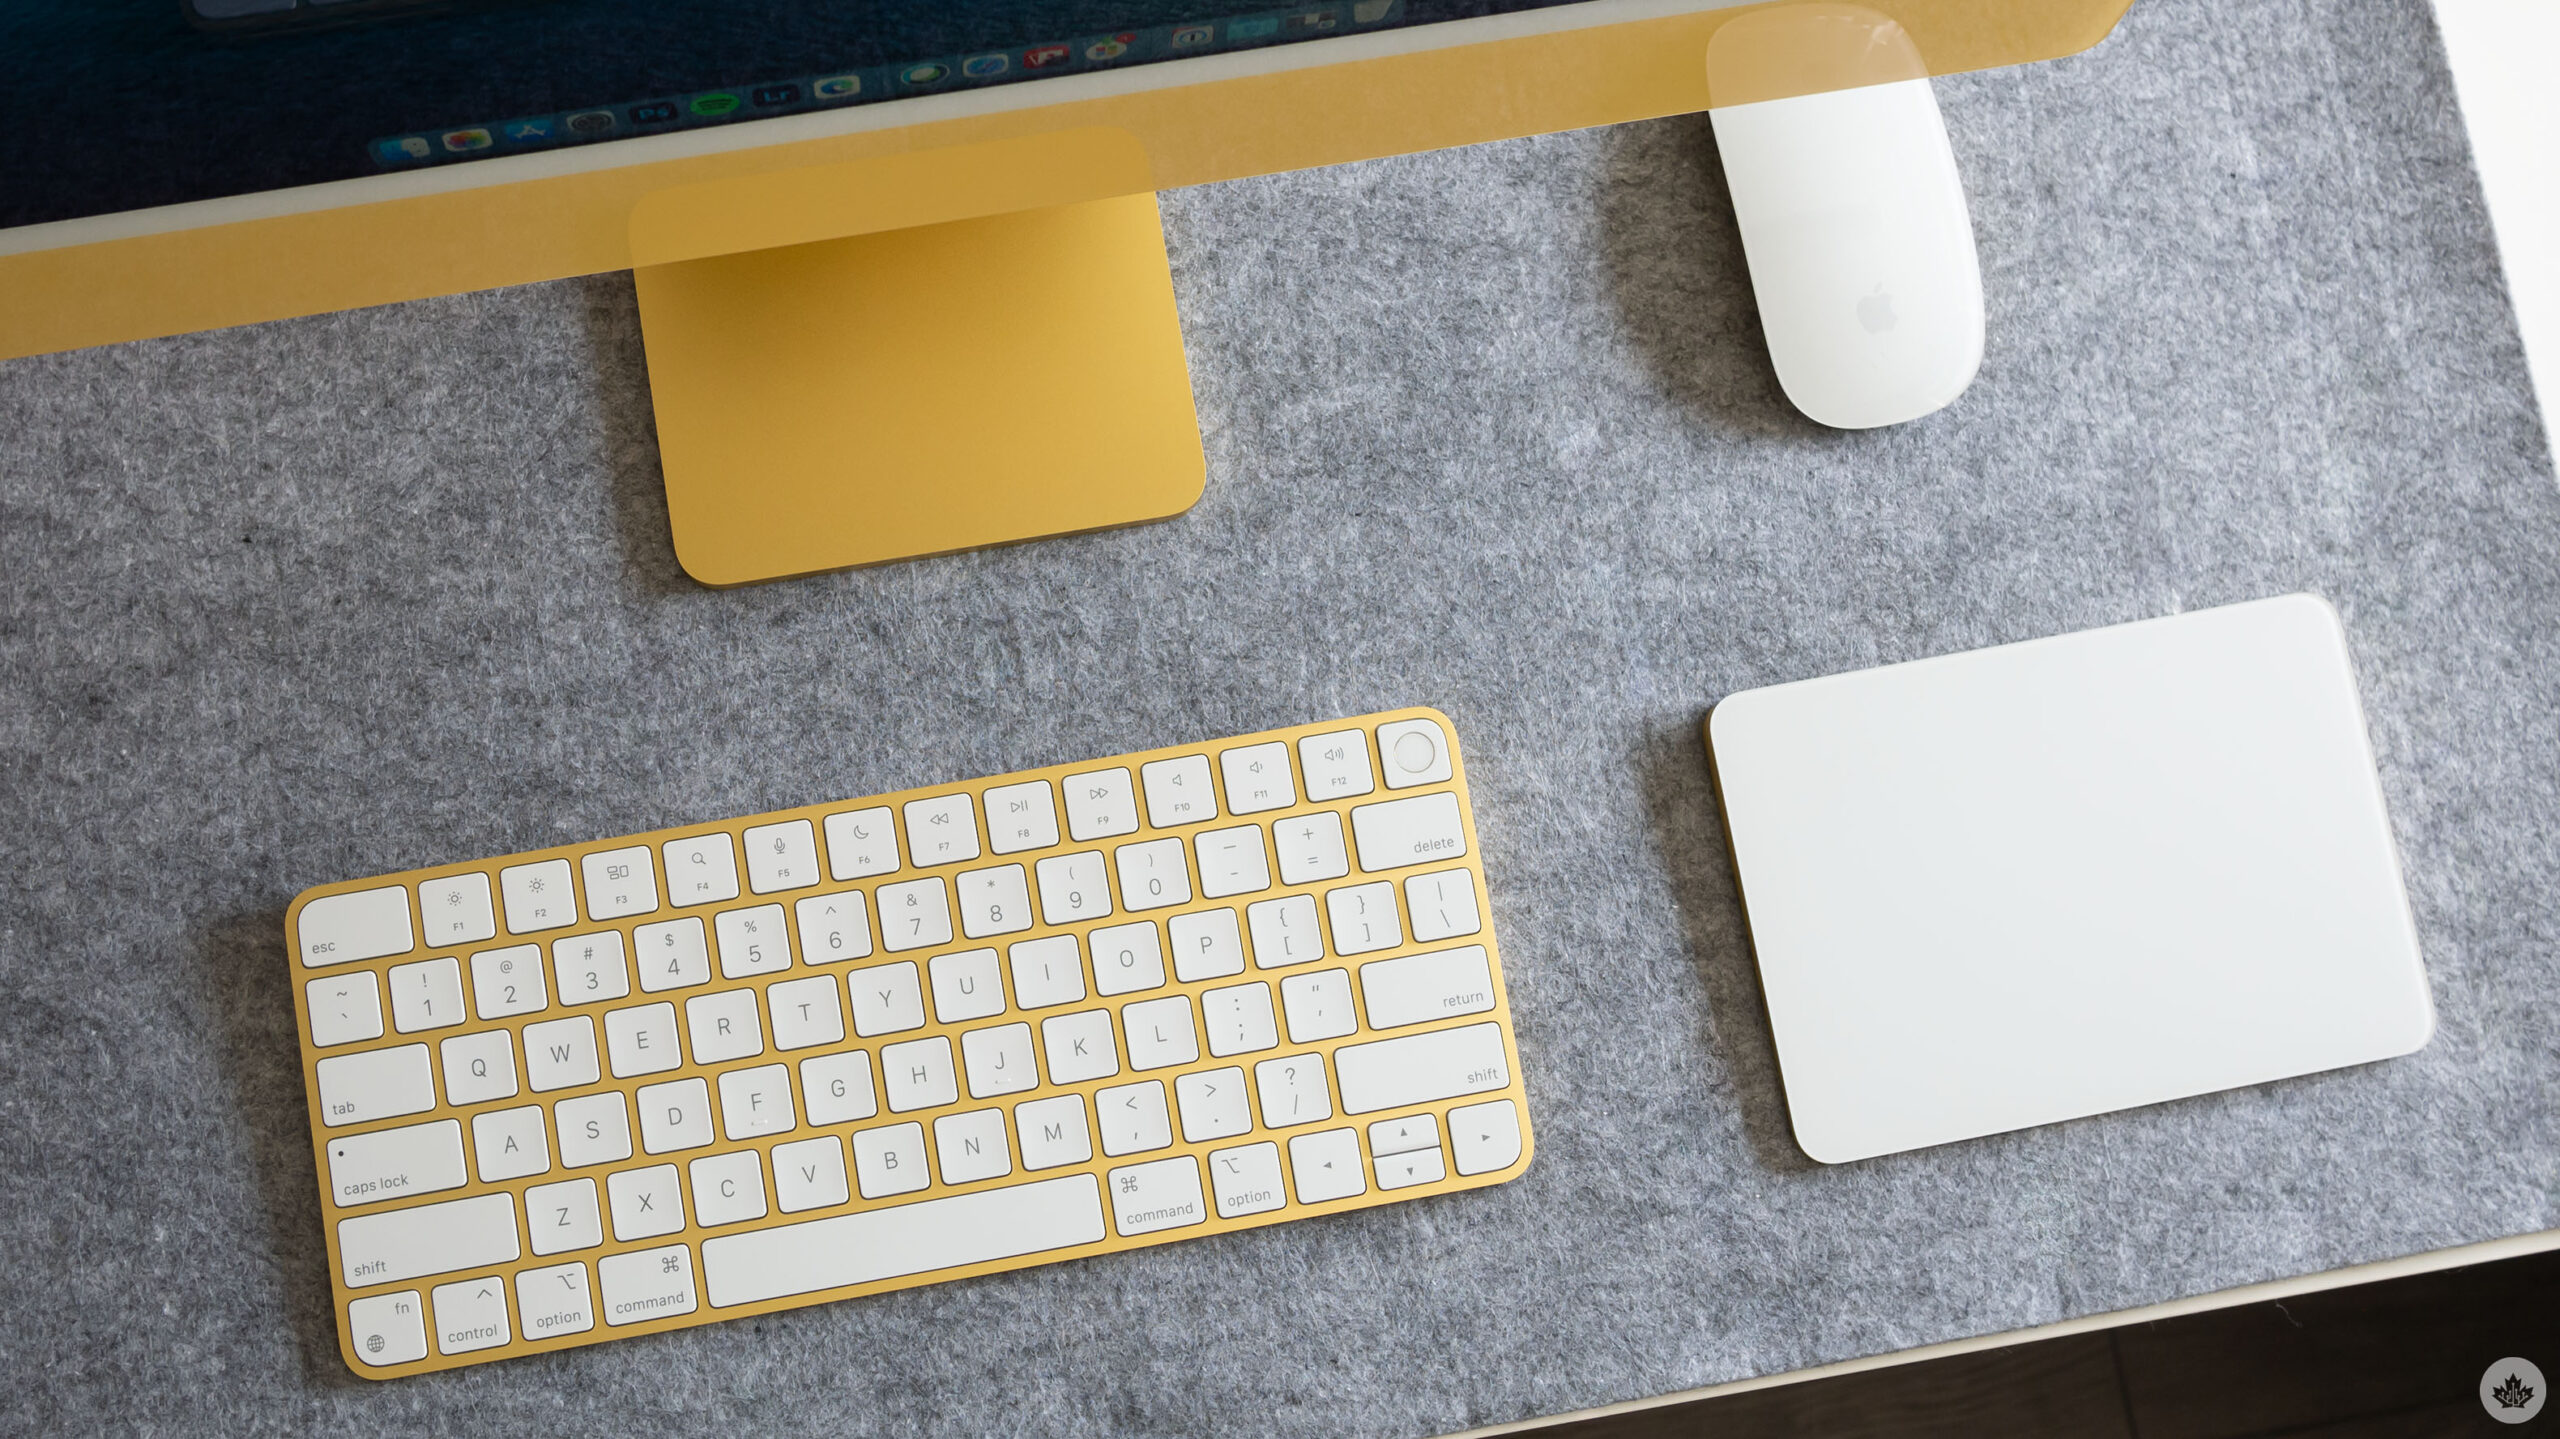 Set up your Magic Keyboard, Magic Mouse, or Magic Trackpad with